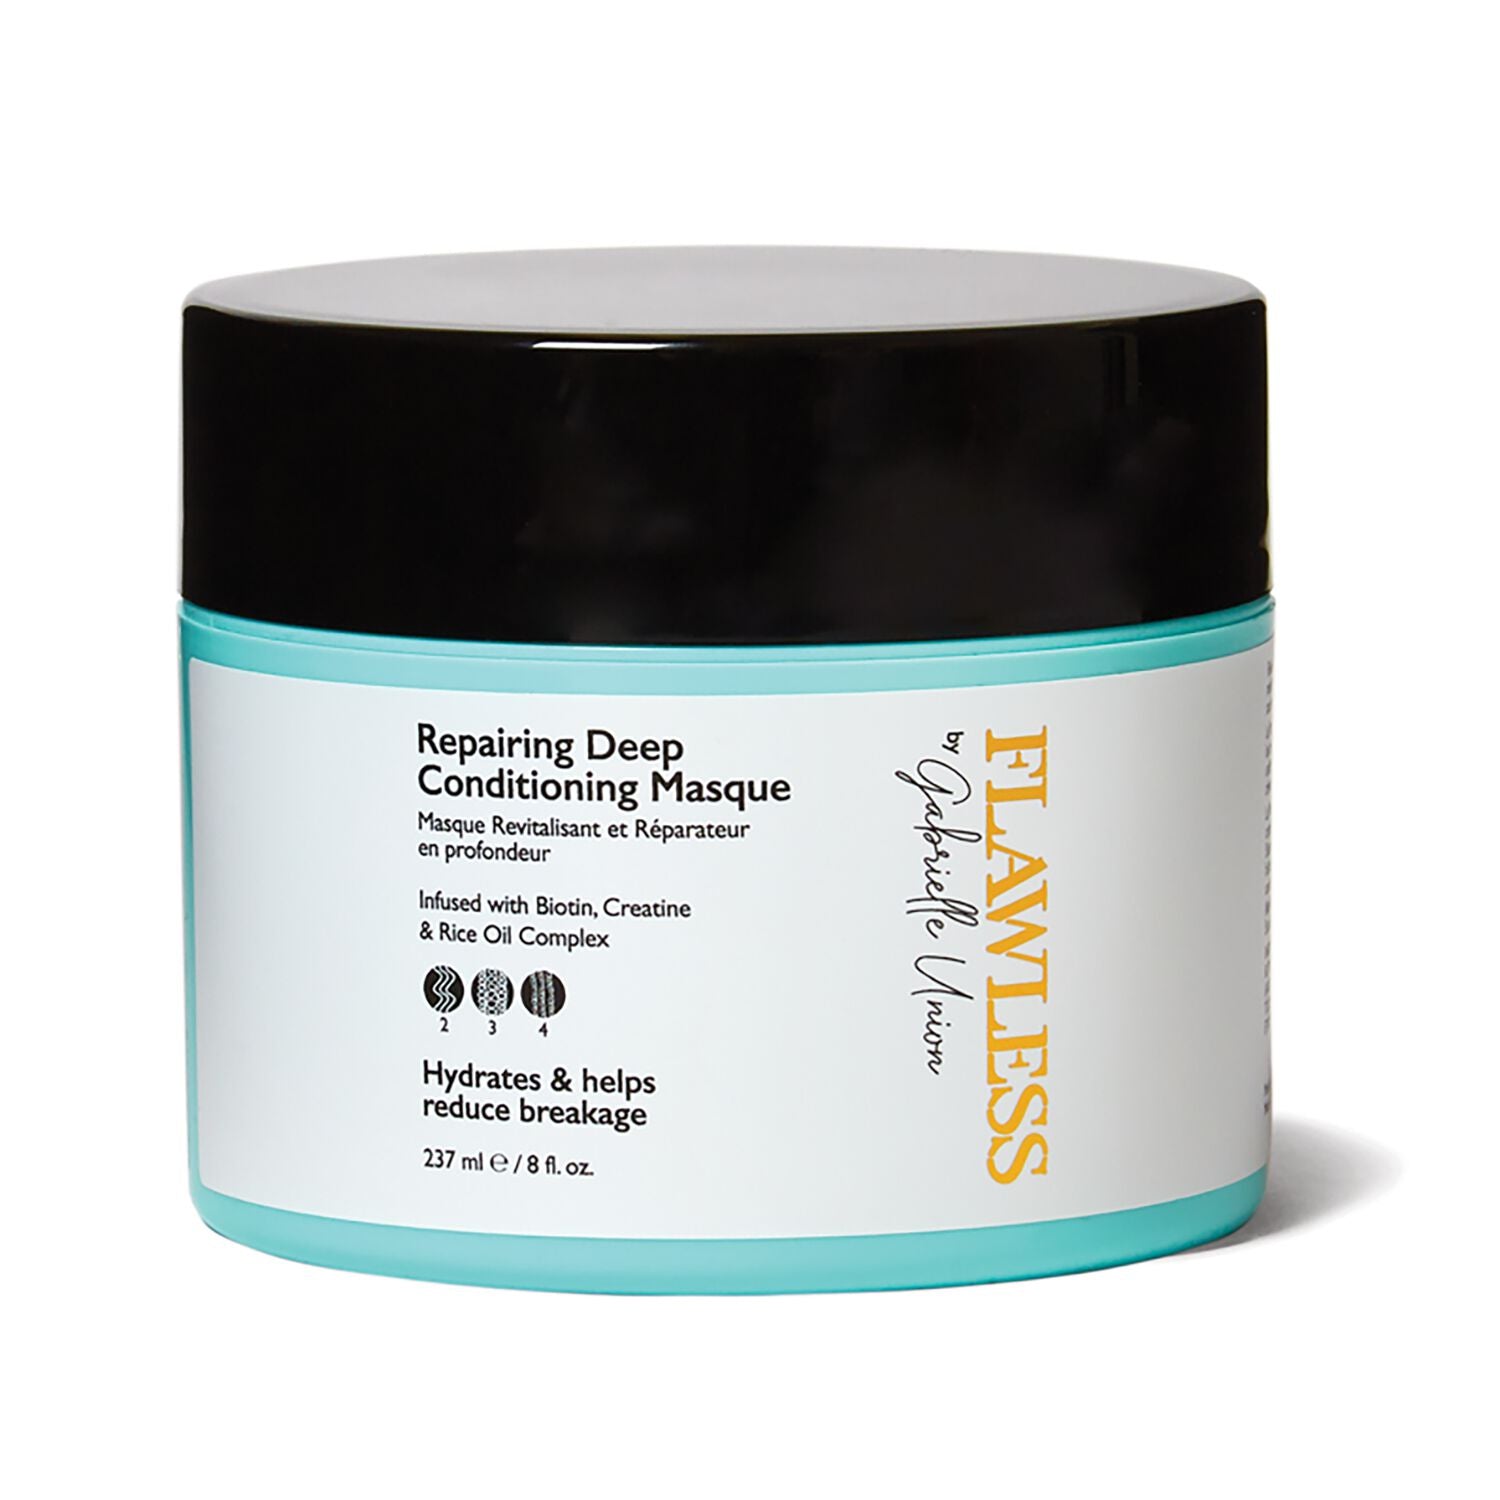 Flawless by Gabrielle Union Repairing Deep Conditioning Masque